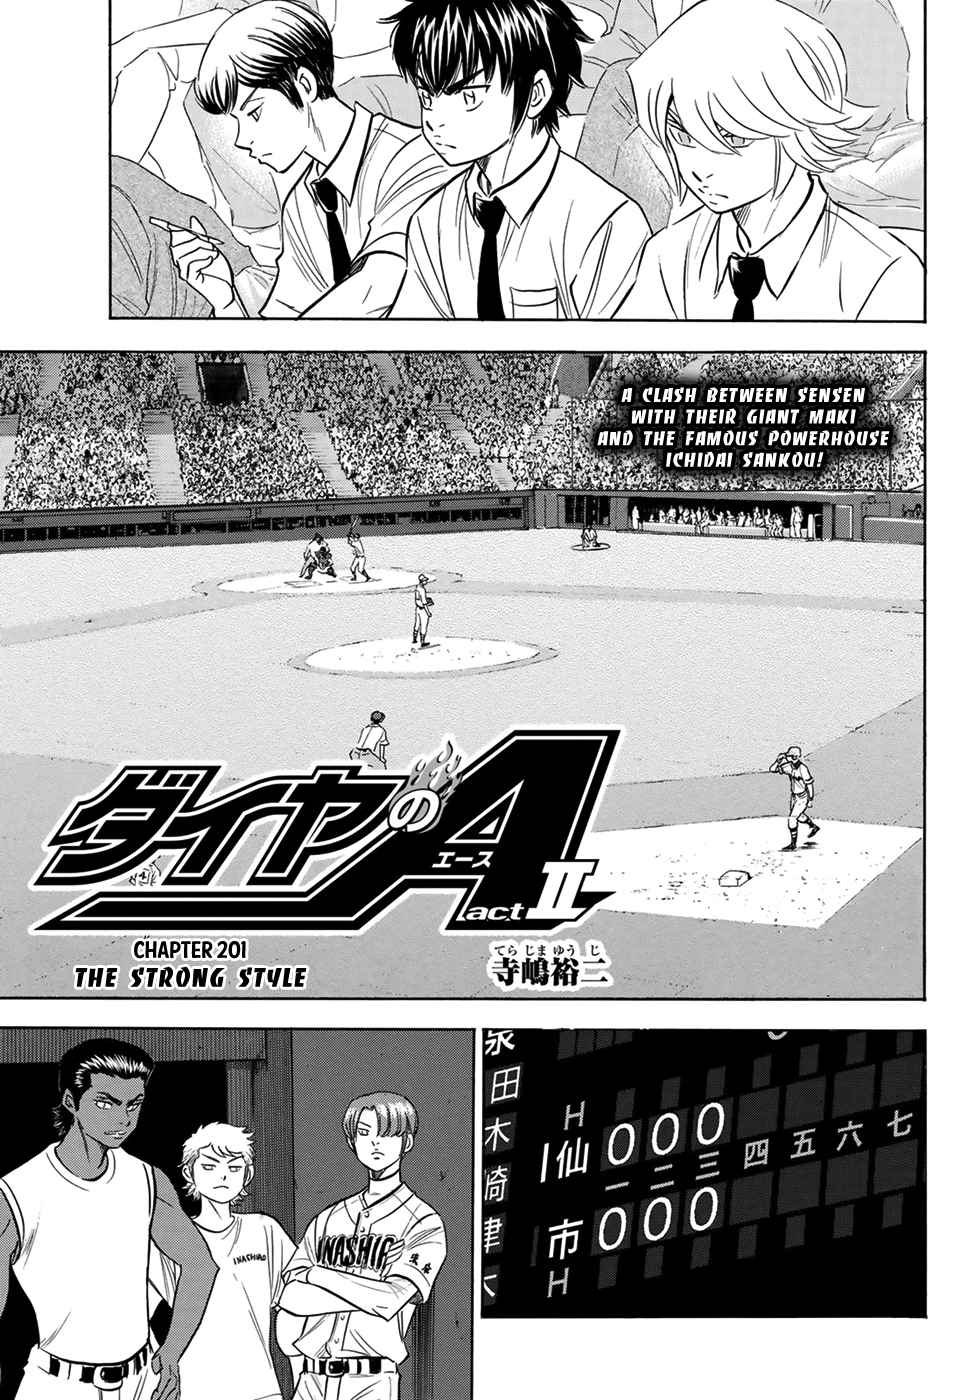 Diamond no Ace Act II Ch. 201 The Strong Style